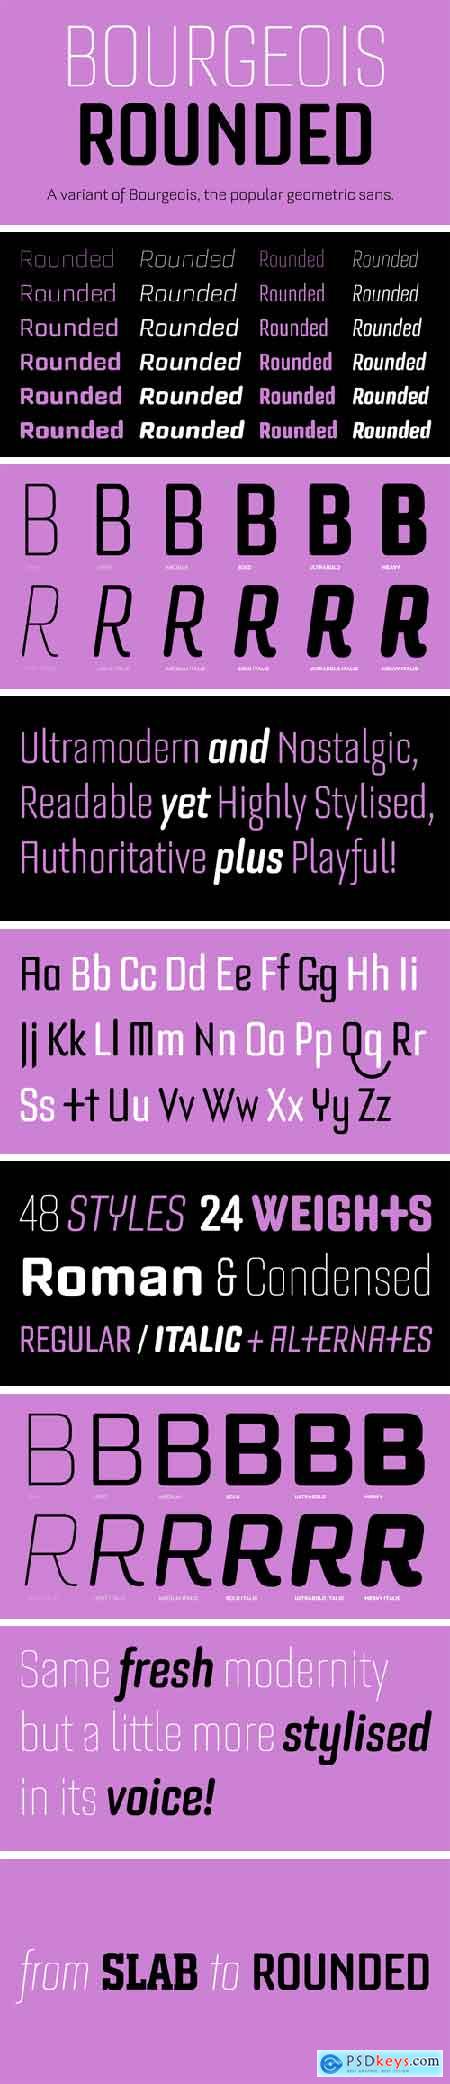 Bourgeois Rounded Font Family